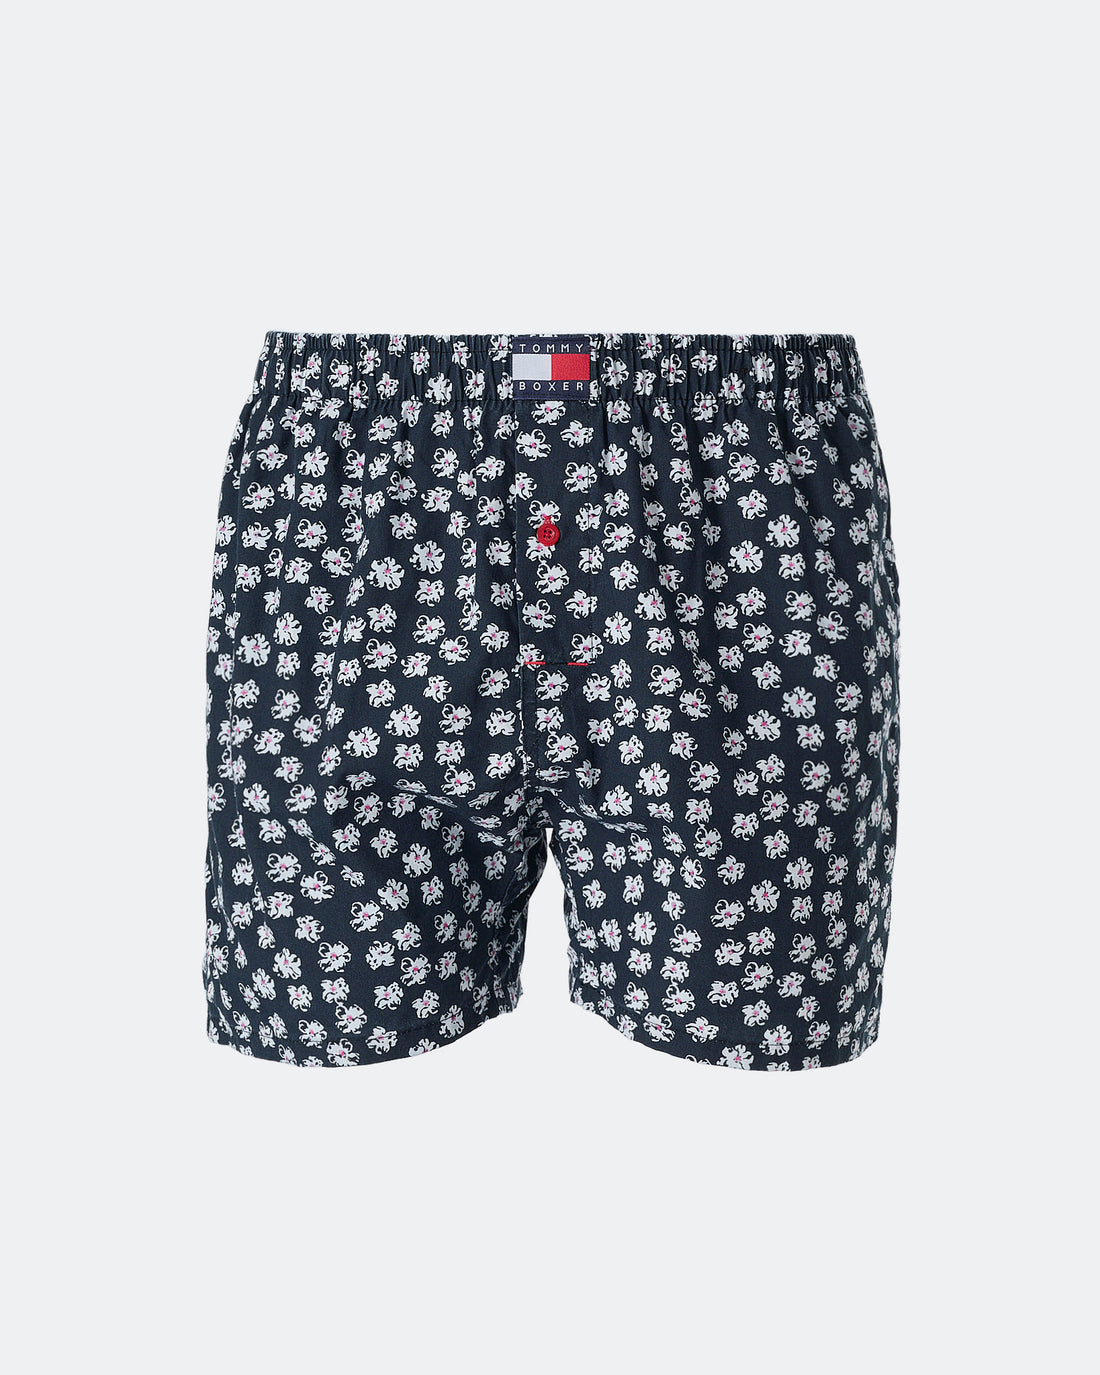 TH Floral Over Printed Men Boxer 6.90